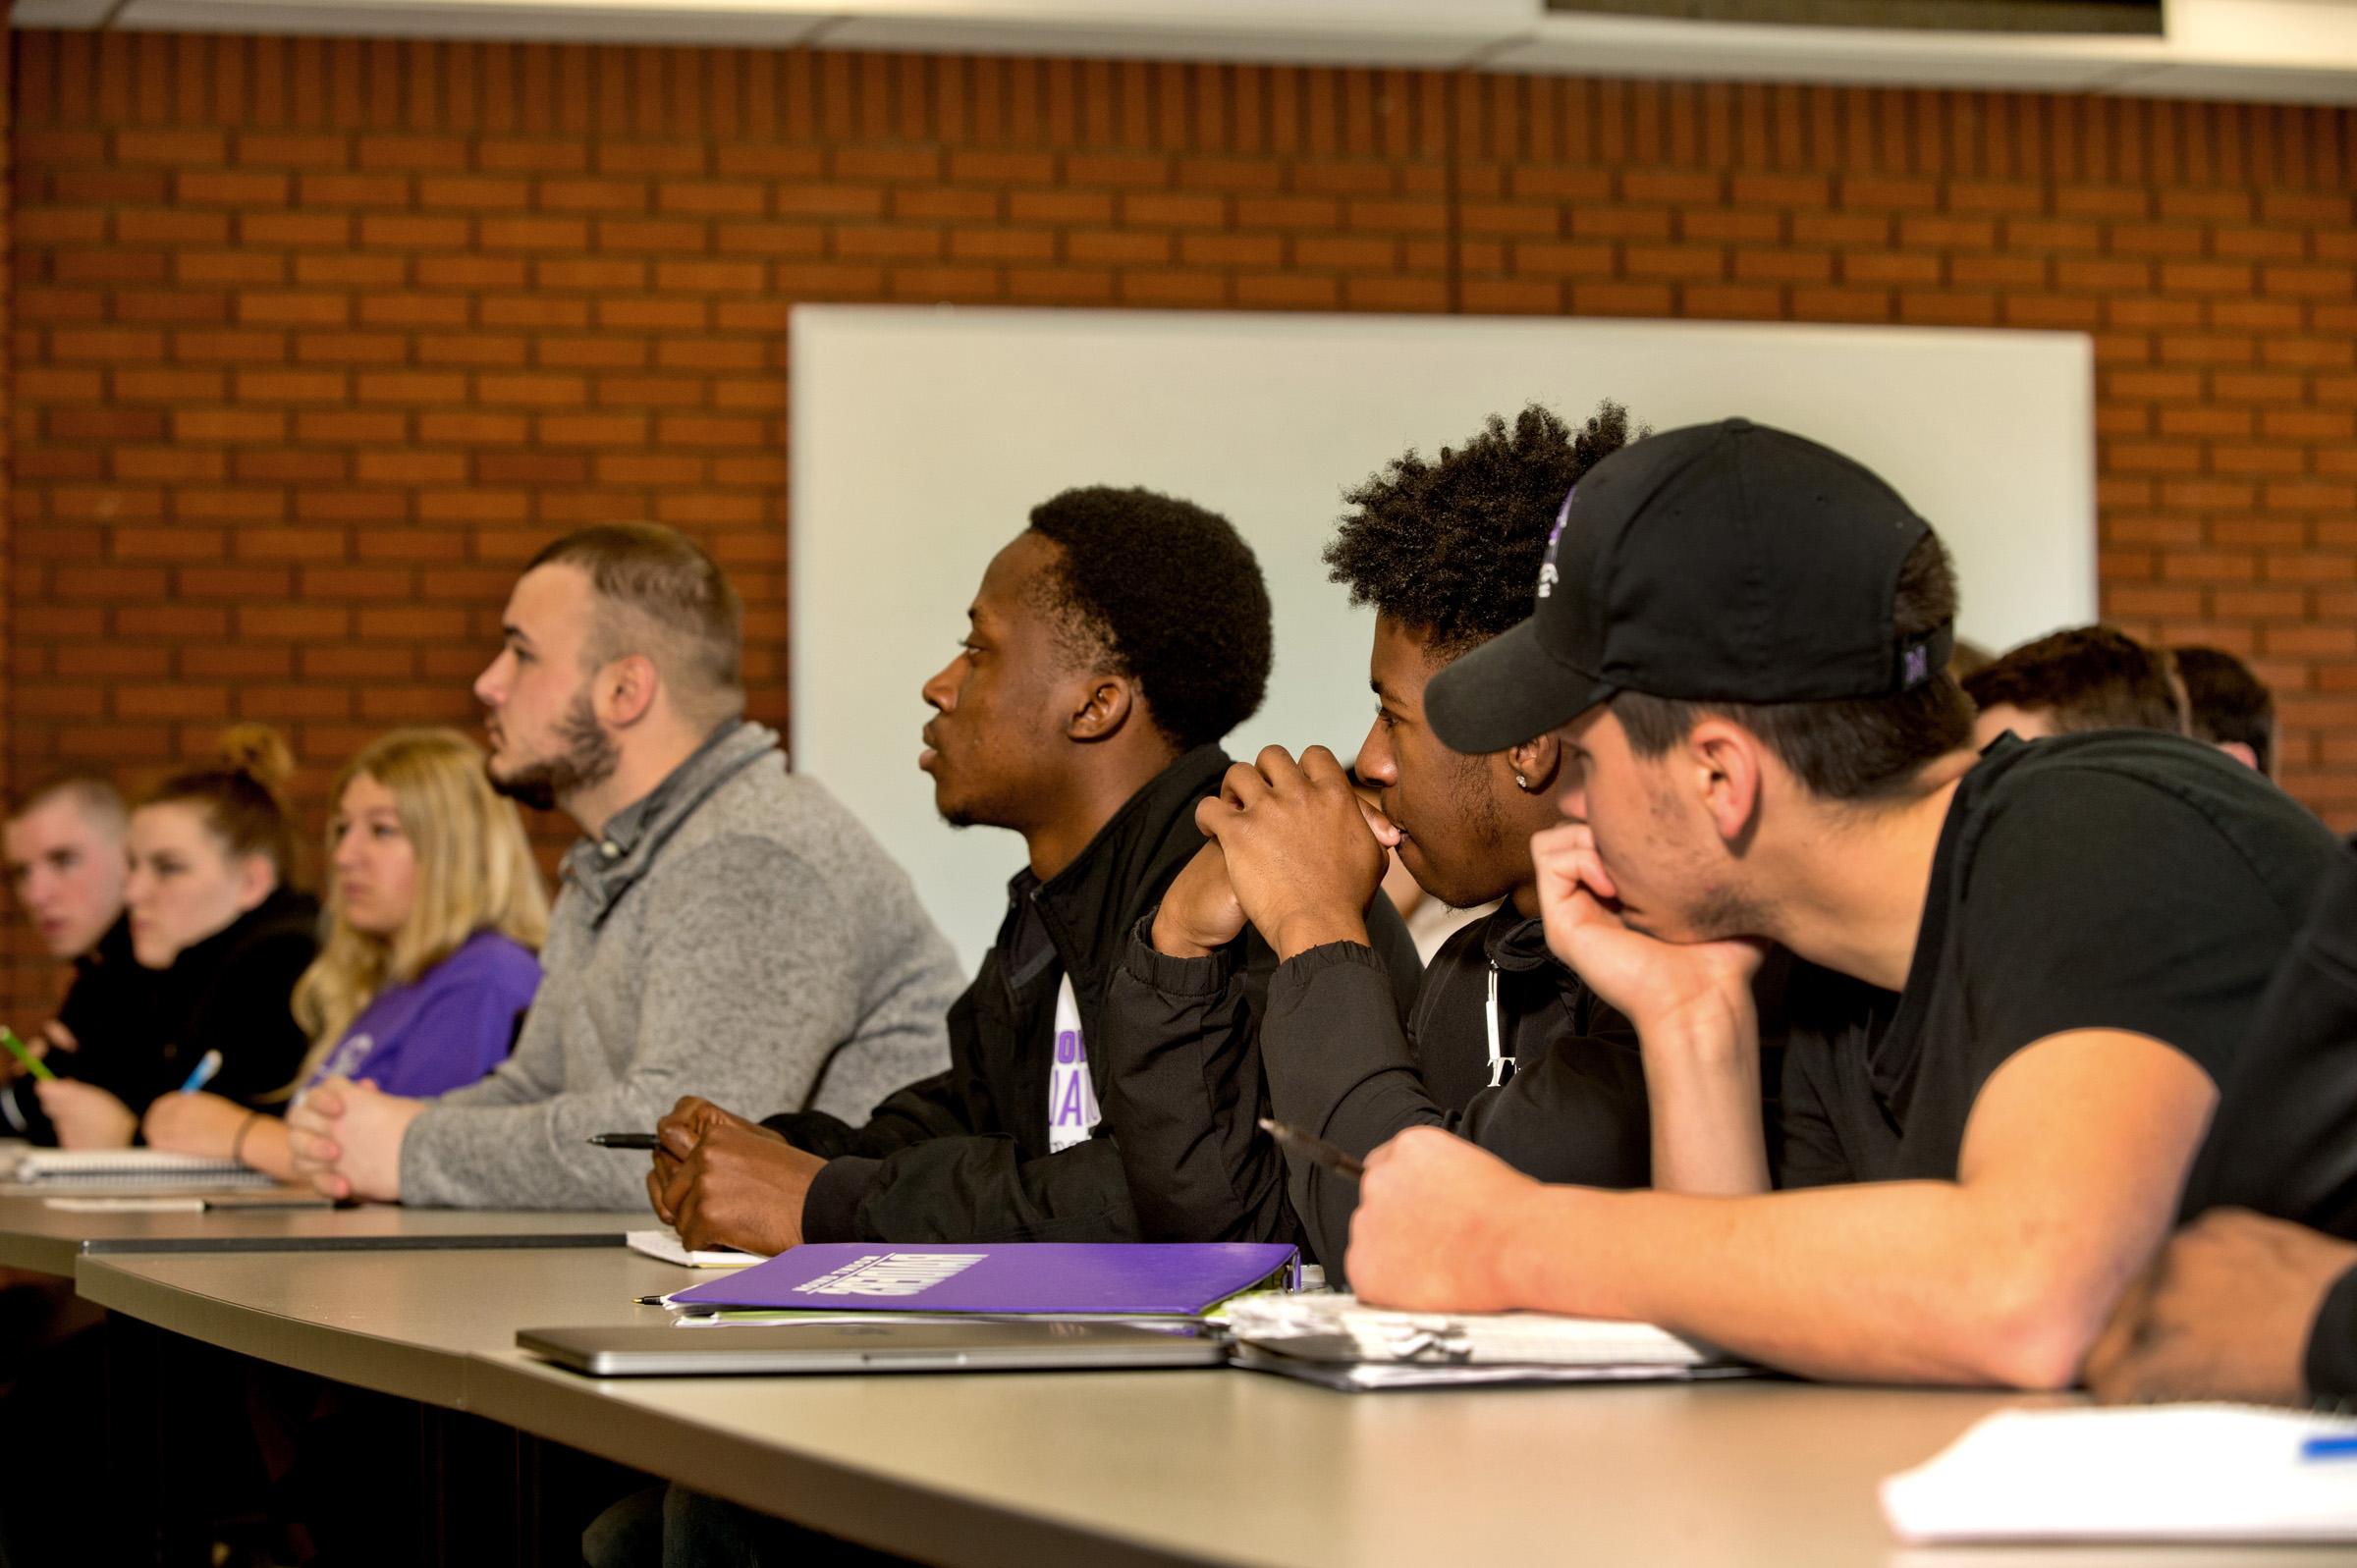 Mount Union students in a classroom 